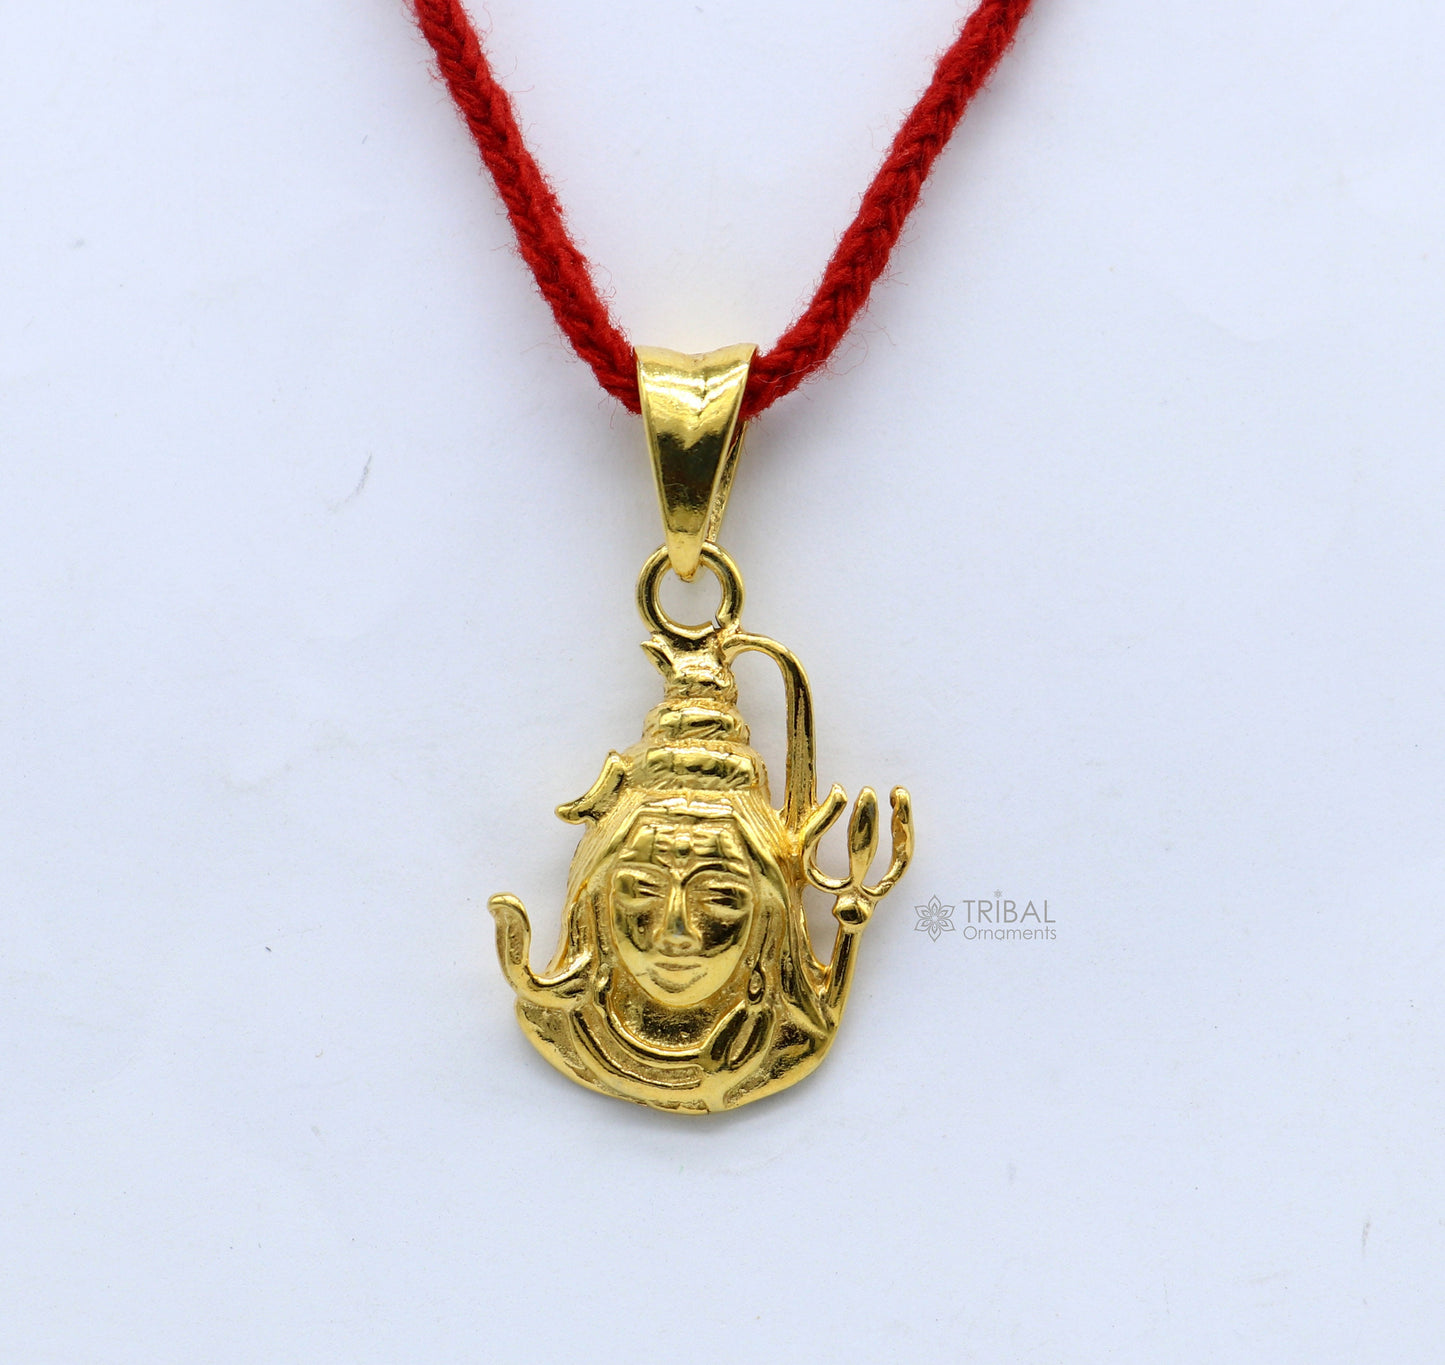 925 sterling silver unique gold polished design idols Lord Shiva pendant, excellent style pendant with trident  unisex divine jewelry nsp600 - TRIBAL ORNAMENTS